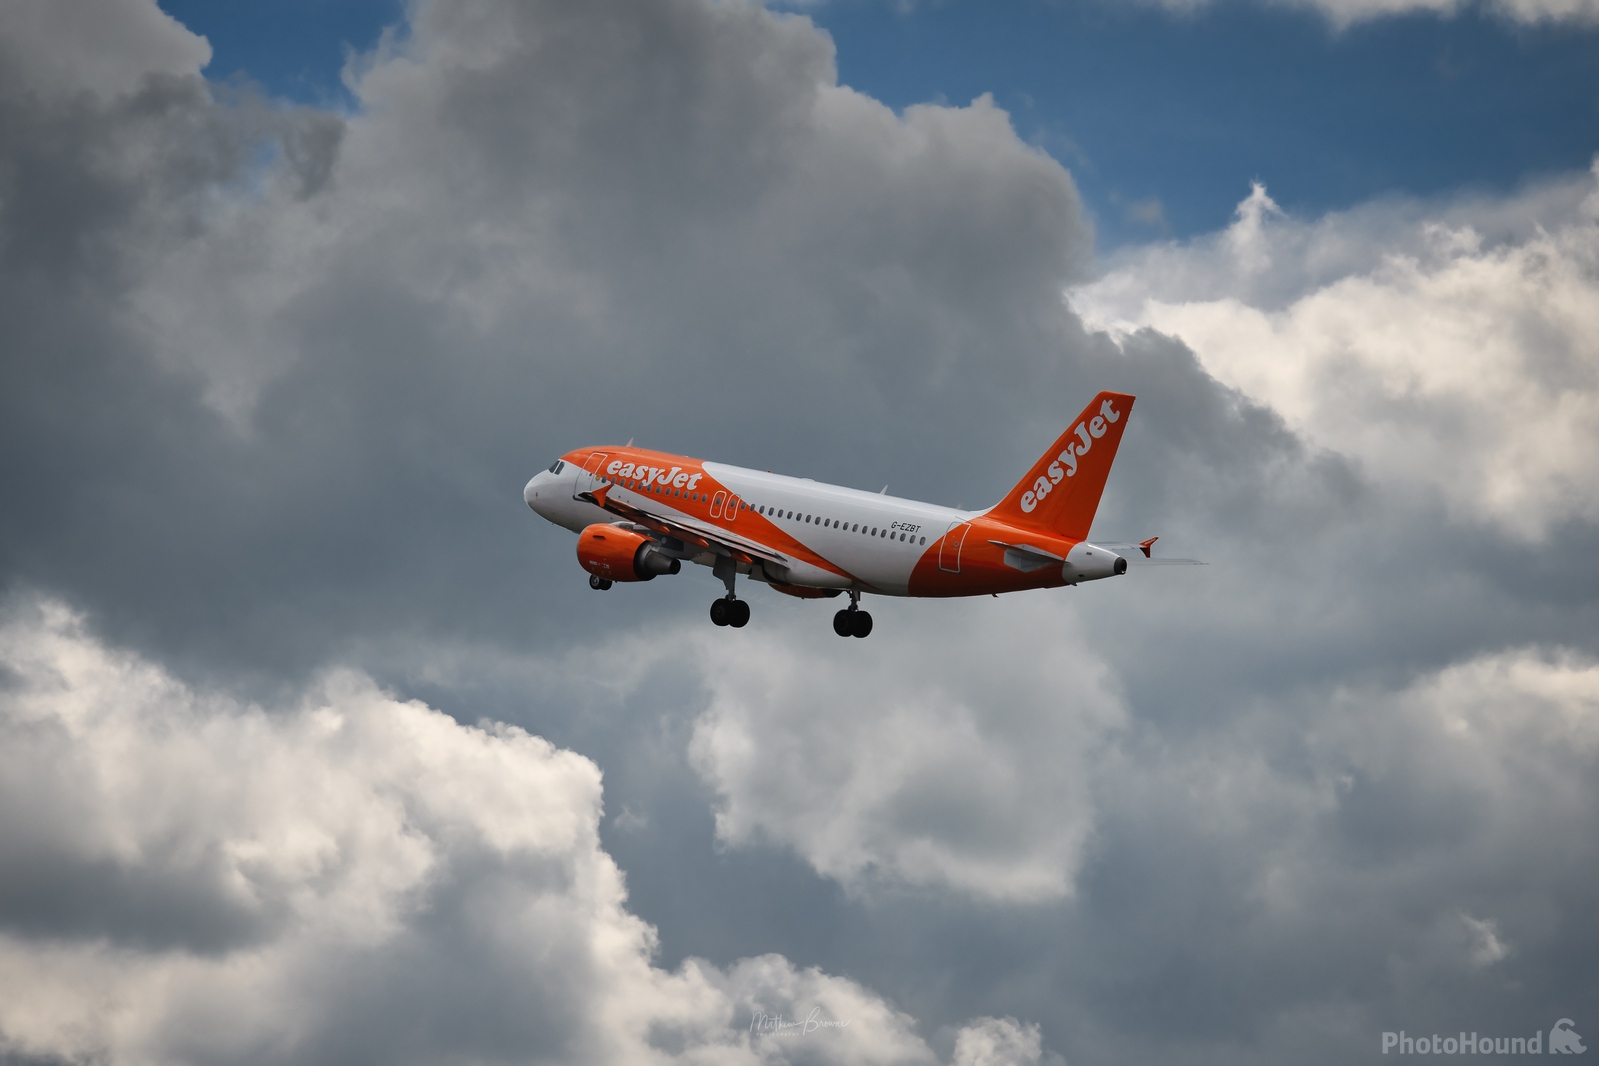 Image of Bristol Airport by Mathew Browne